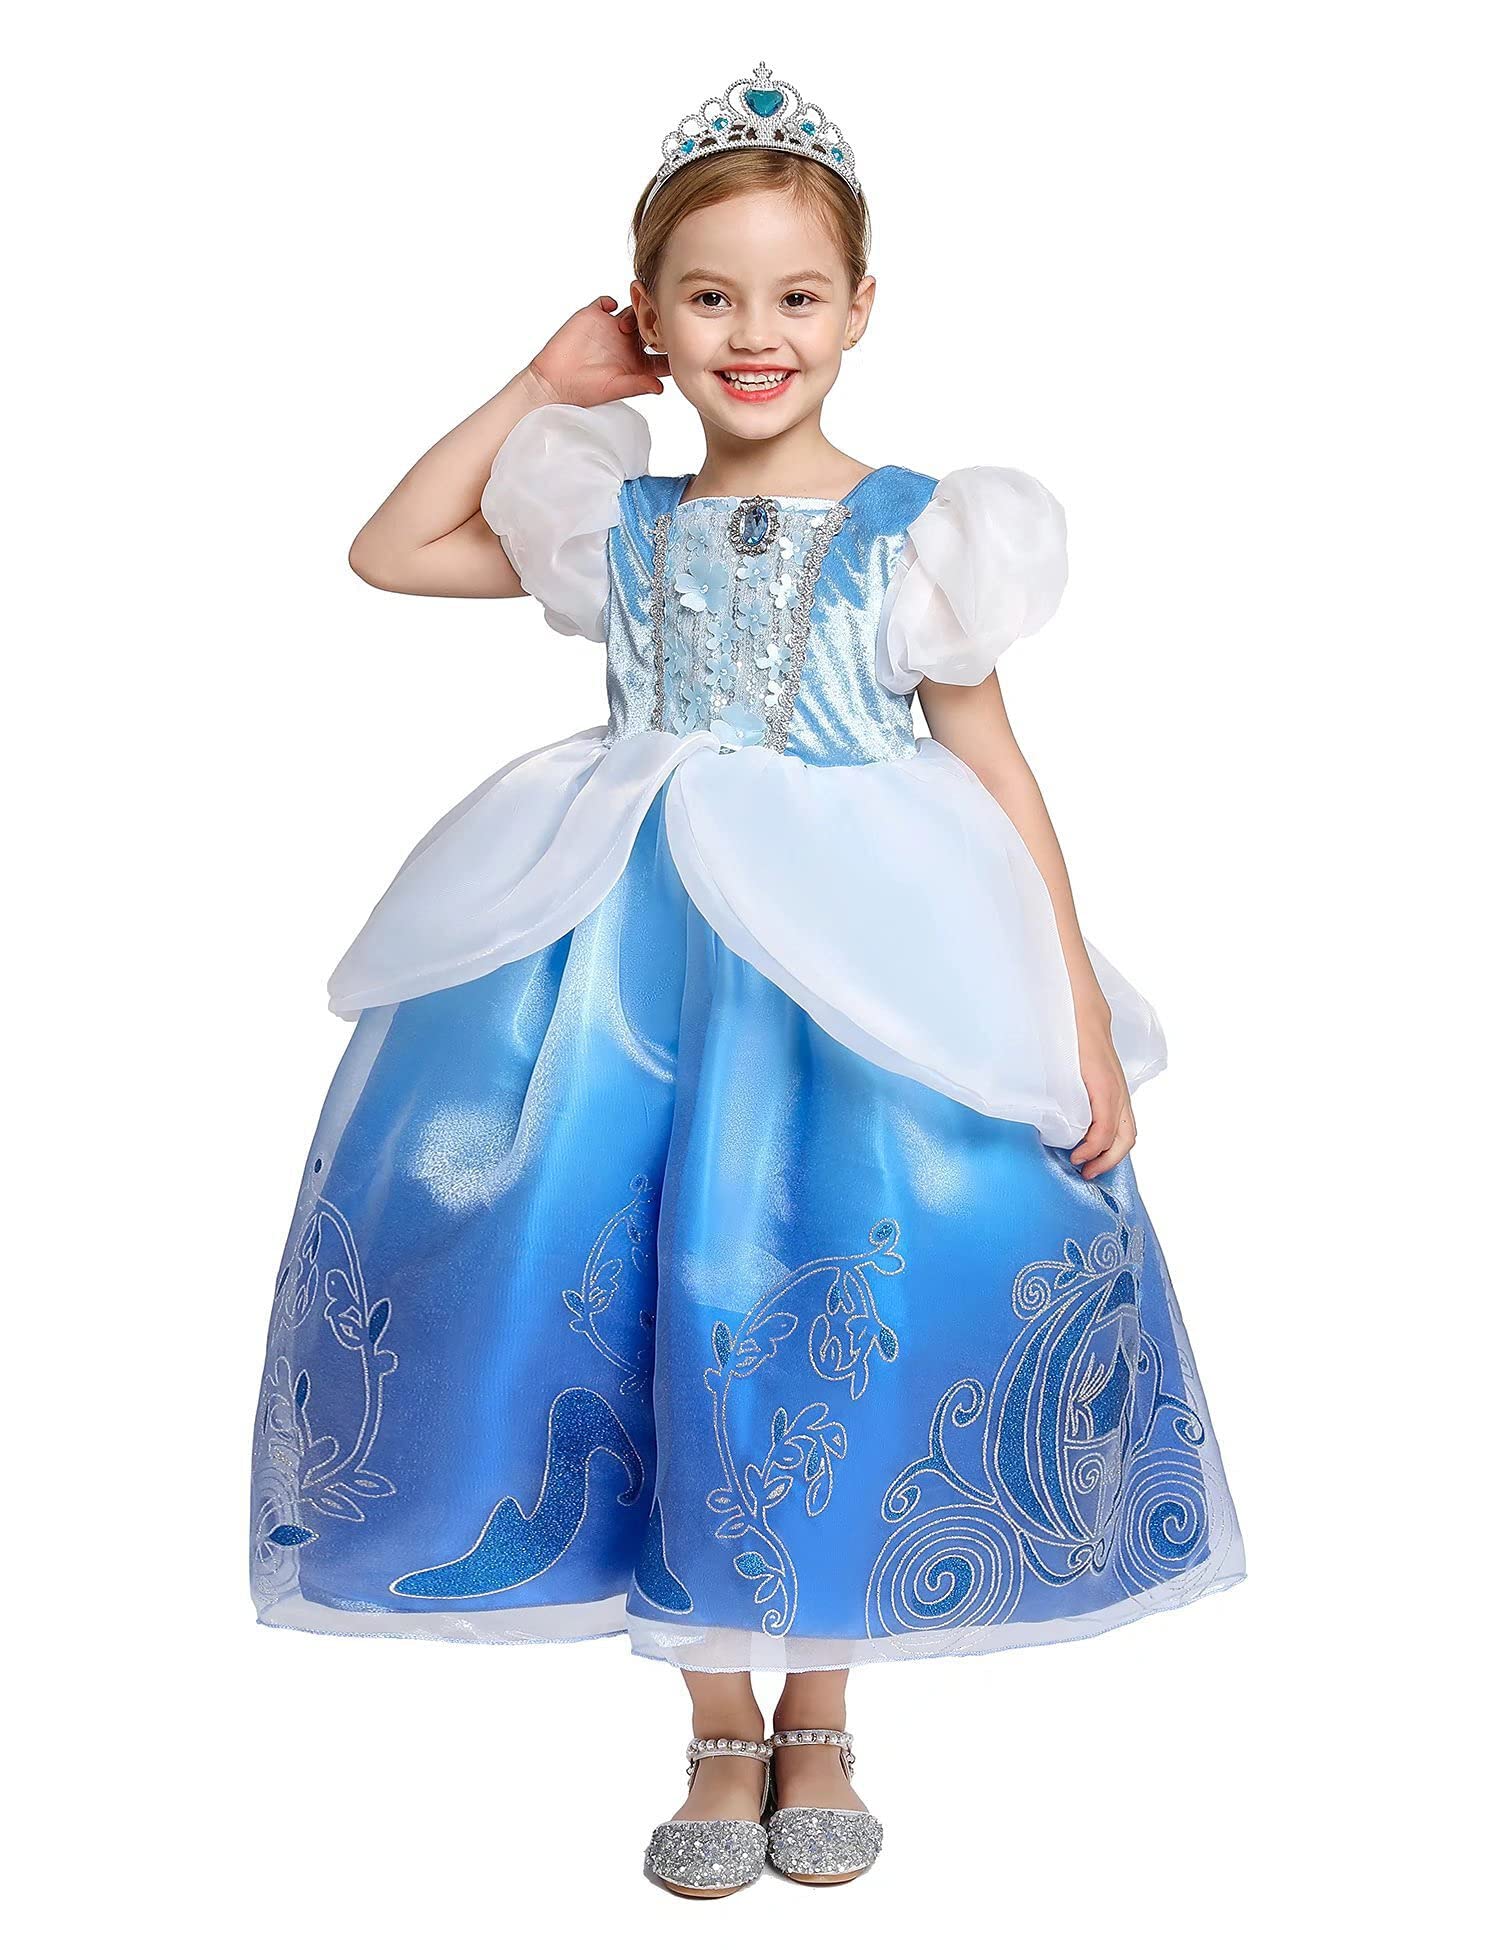 Kidswant Toddler Baby Girls Luxury Princess Party Halloween Cosplay Costume Dress Up with Accessorries